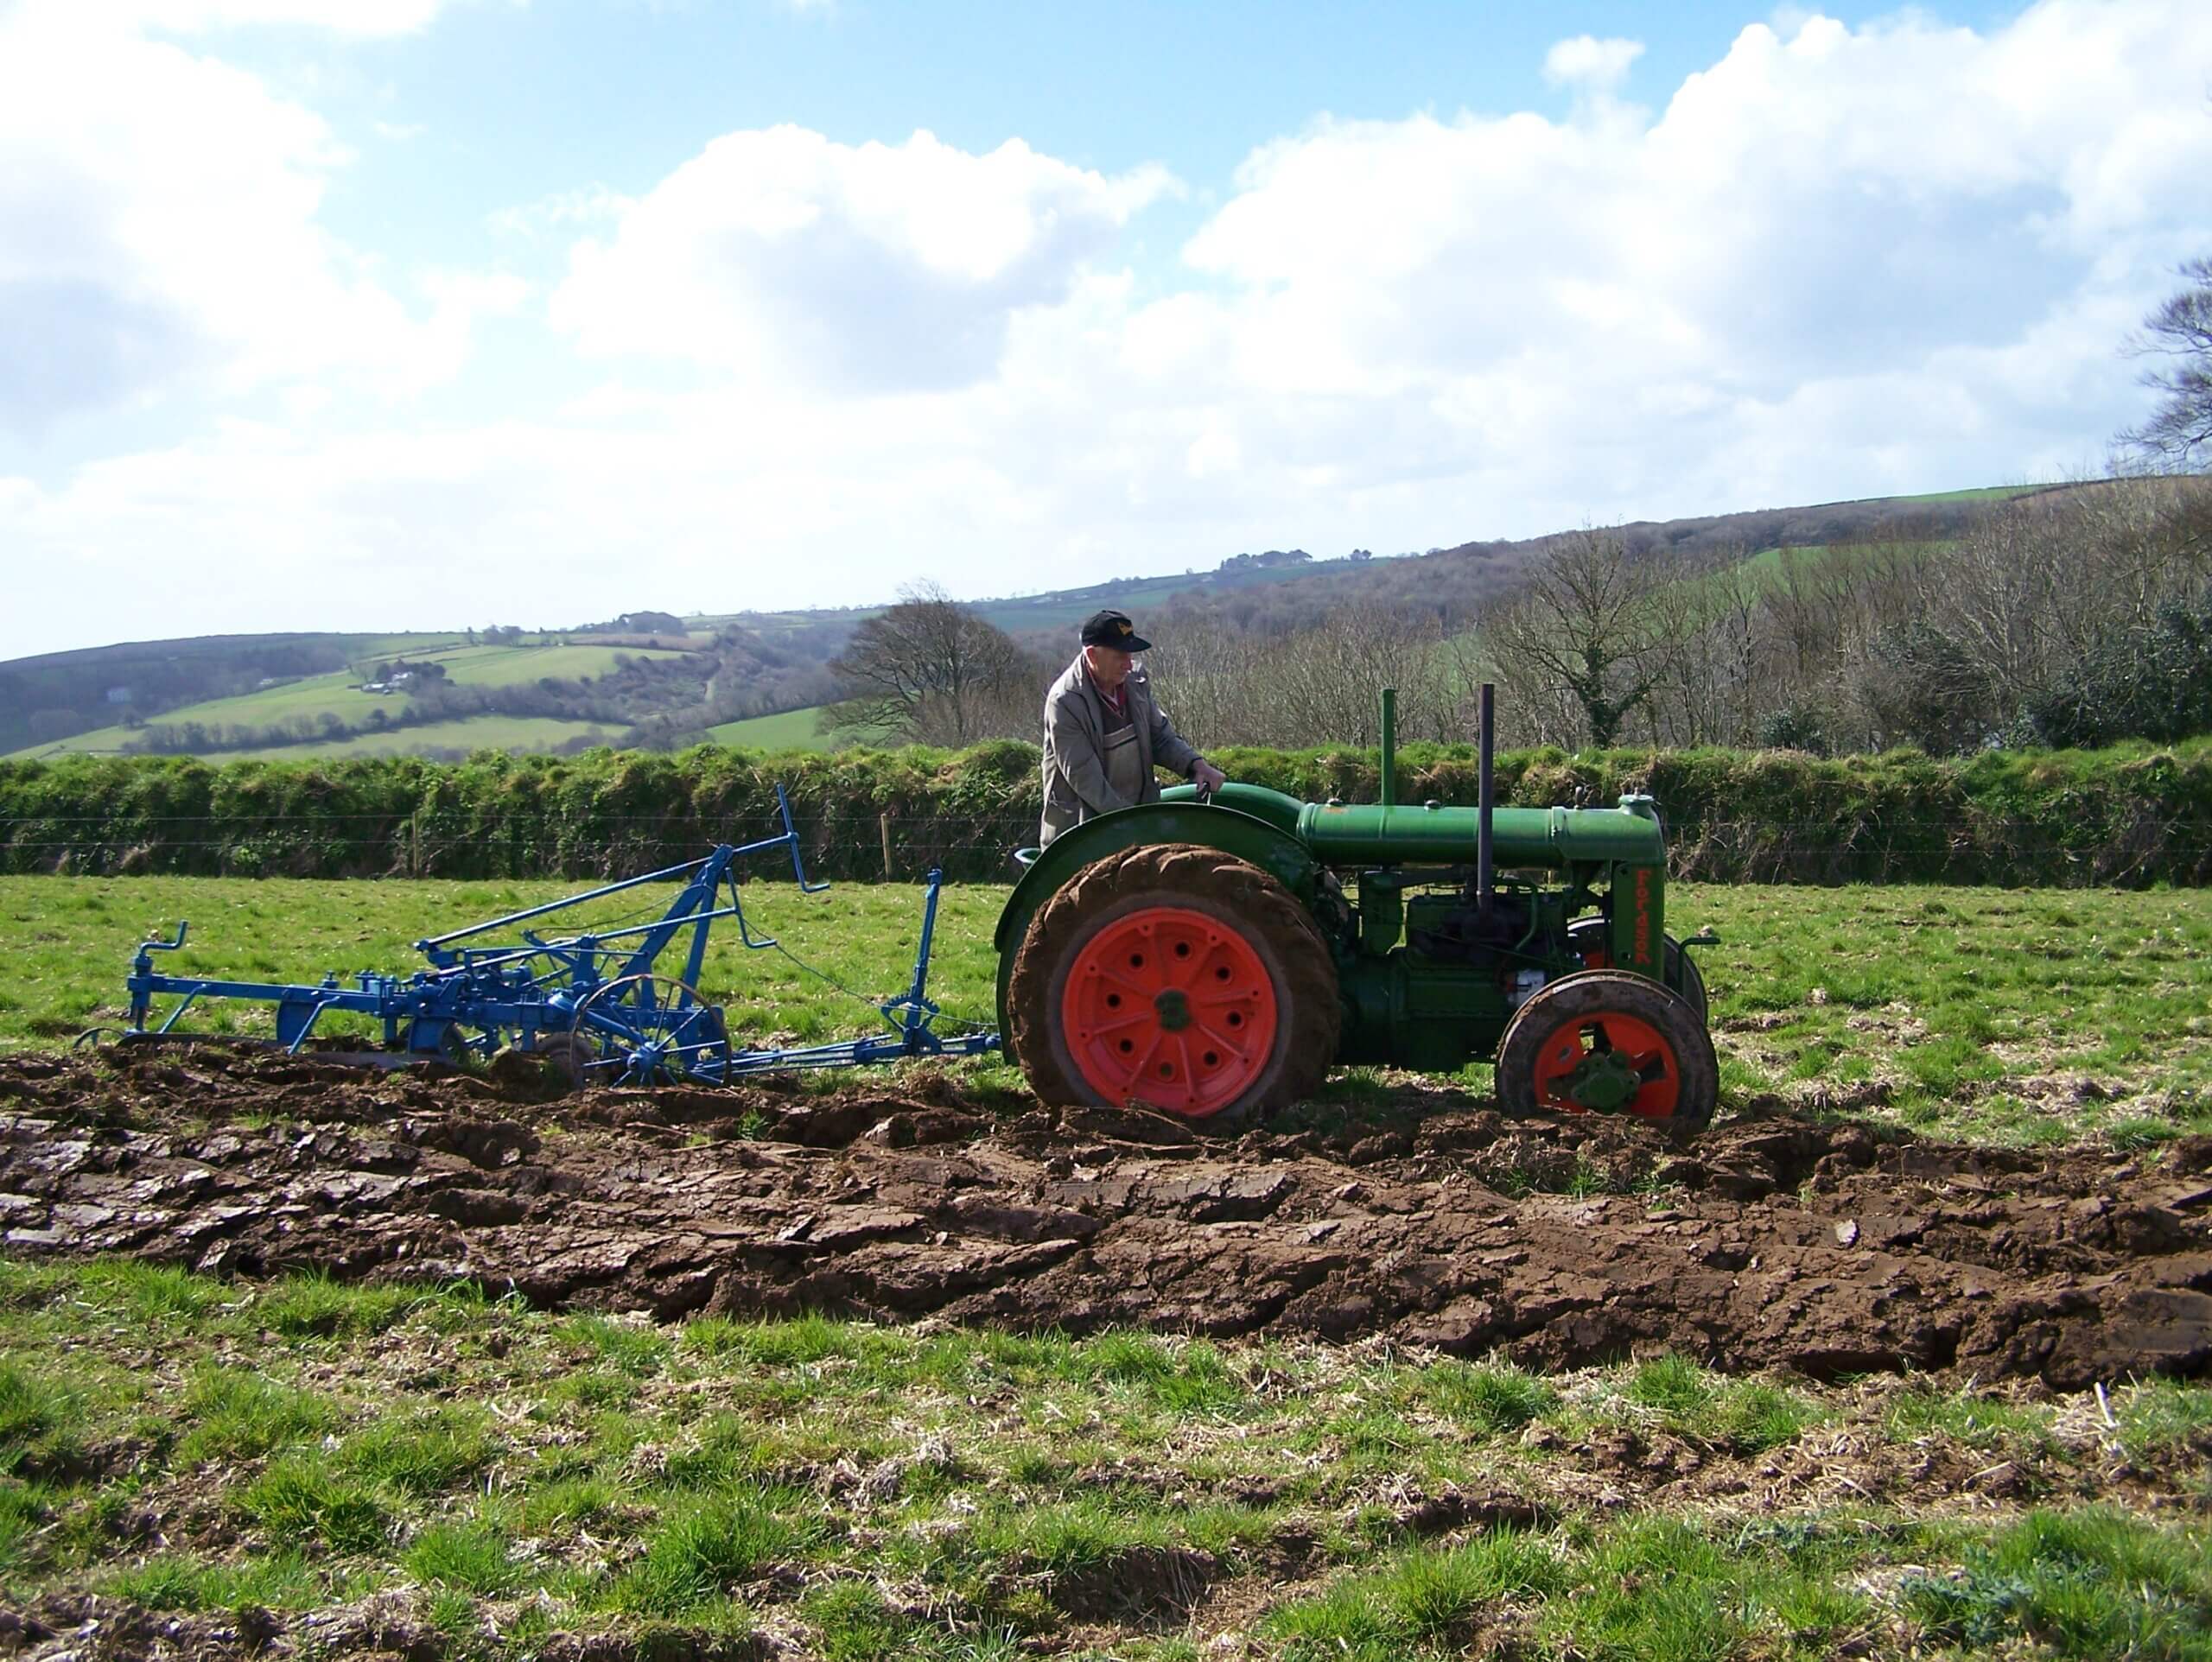 George ploughing with A Standard Fordson N, the same model of tractor he would have used in his early working years